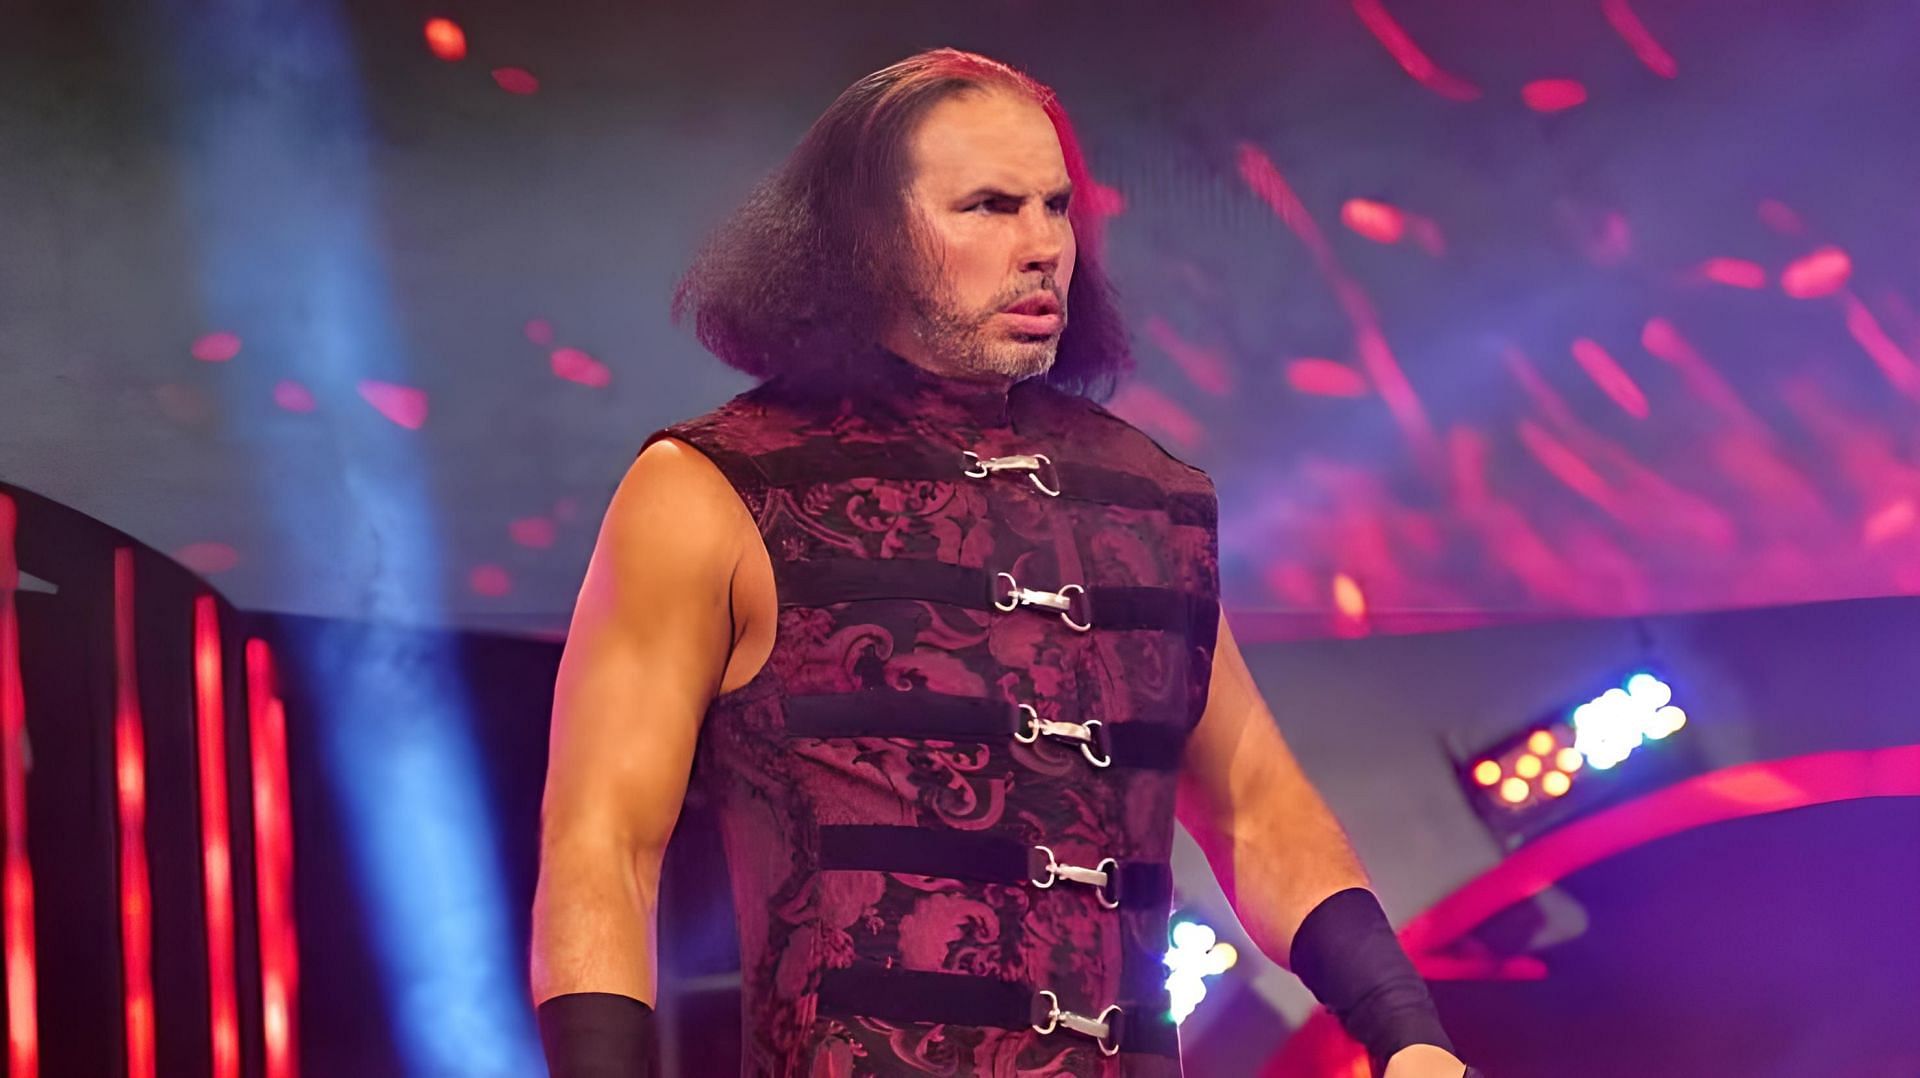 &quot;Broken Matt Hardy&quot; is one of the strangest and most loved characters of all time